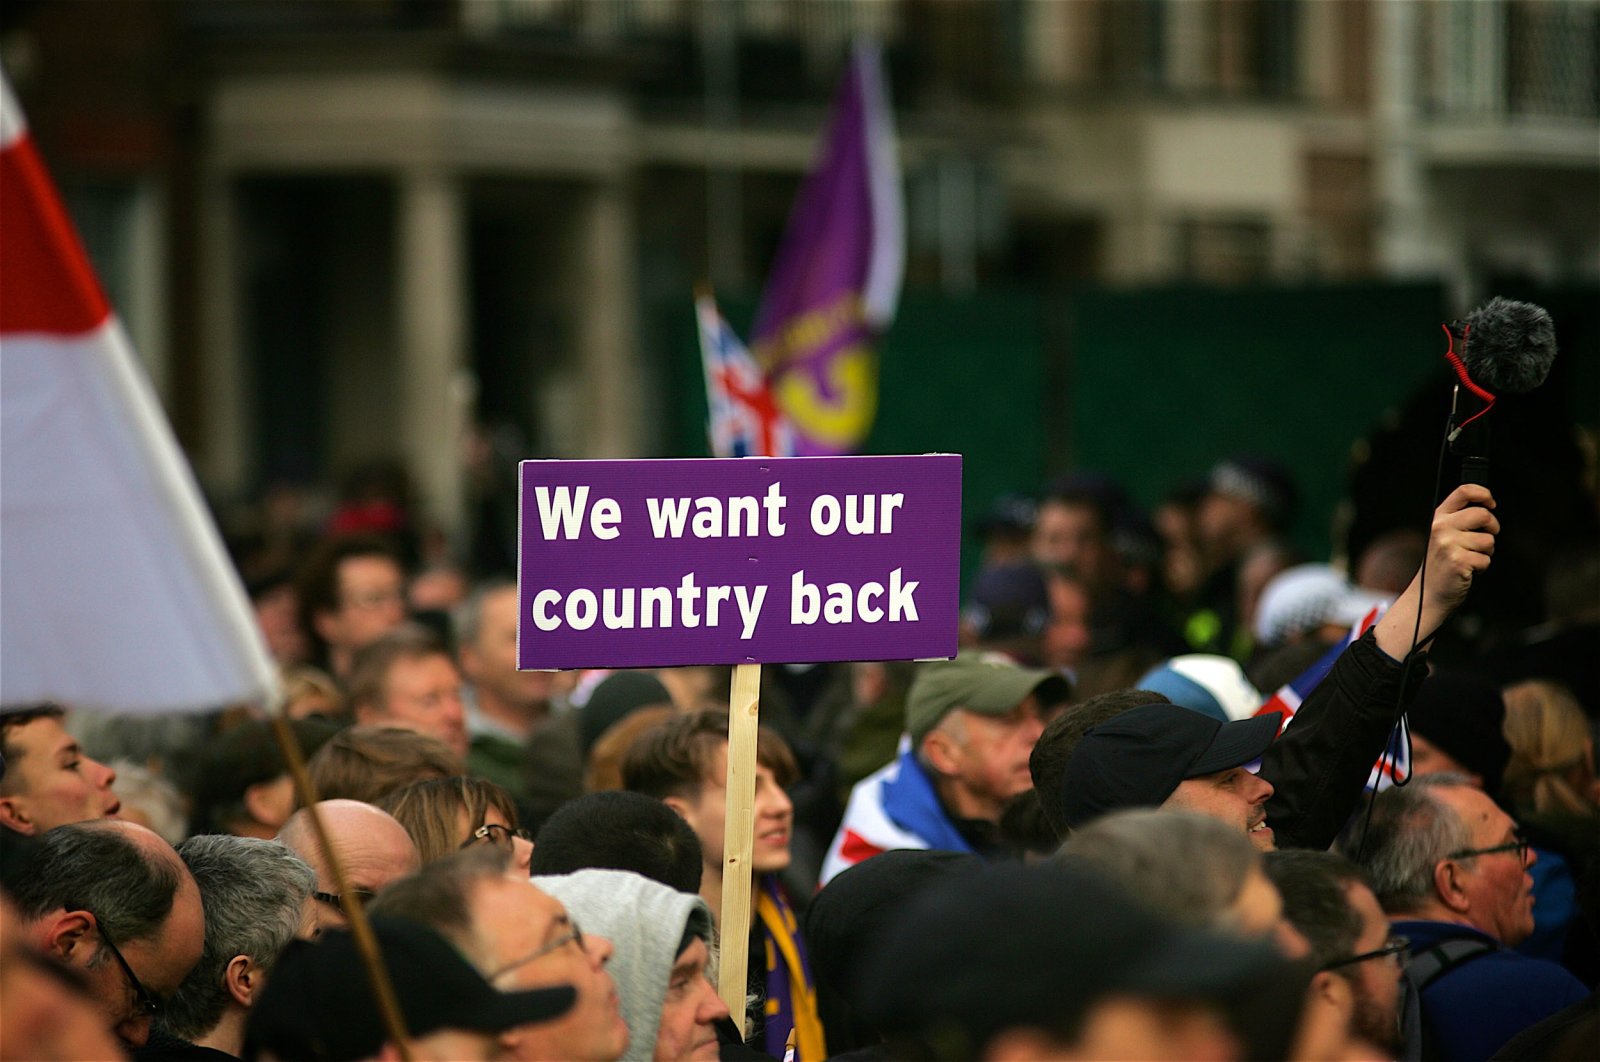 UKIP supporters join Gerard Batten and Tommy Robinson on the Brexit rally organized by U.K. Independence Party, London, U.K., Sept. 12, 2018. (Shutterstock Photo)